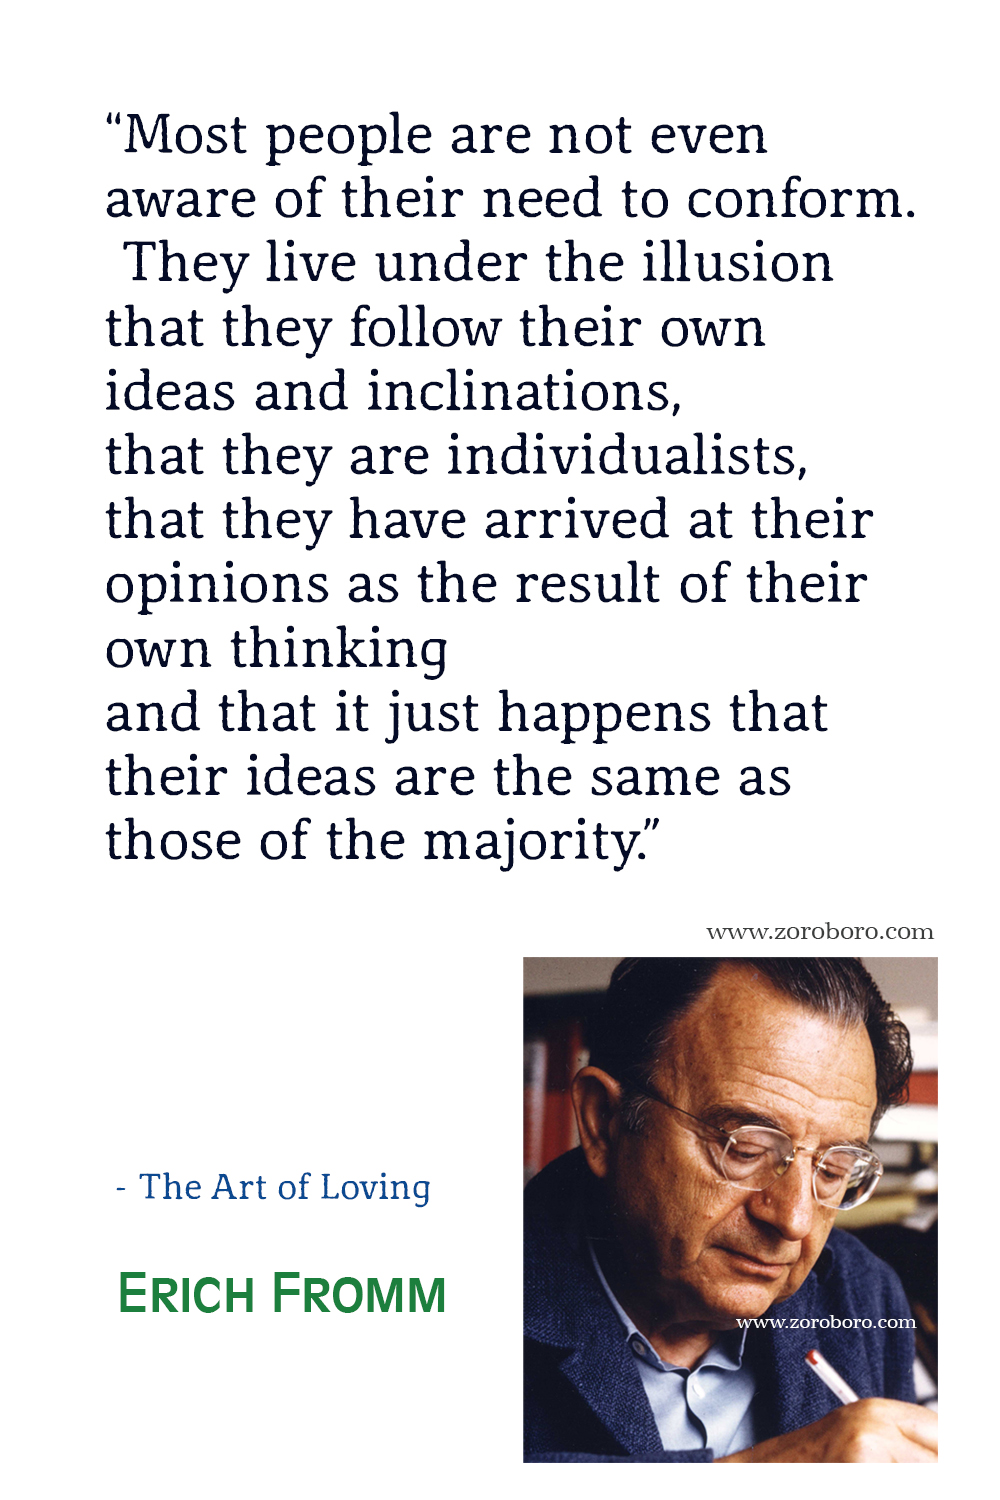 Erich Fromm Quotes, Erich Fromm Art of love Quotes, Erich Fromm Books Quotes, Erich Fromm The Sane Society, Erich Fromm Escape from Freedom Quotes.